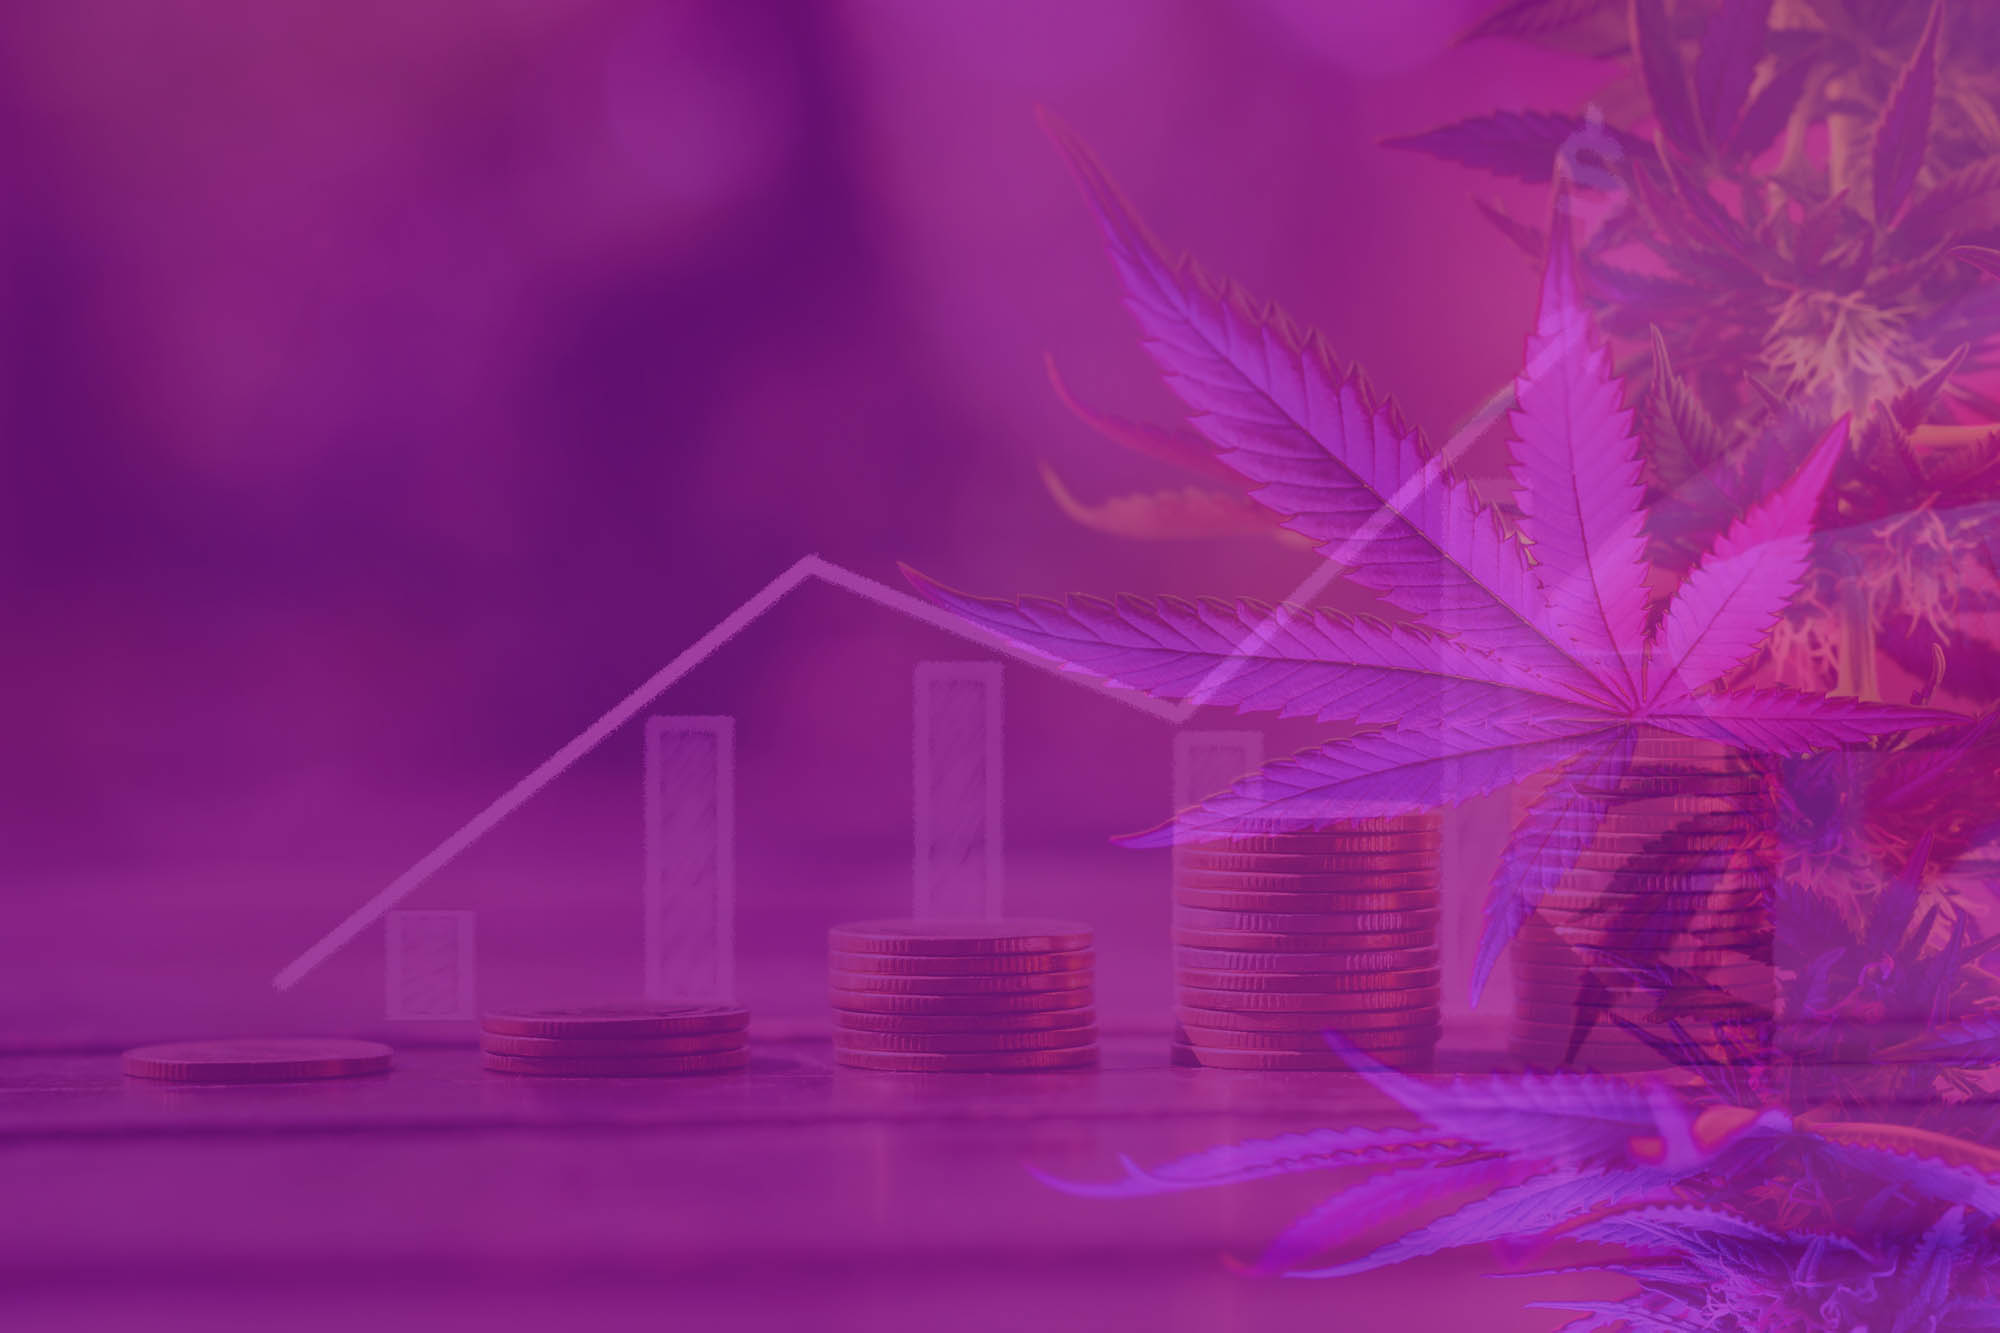 2022 Predictions for the Canadian Cannabis Market